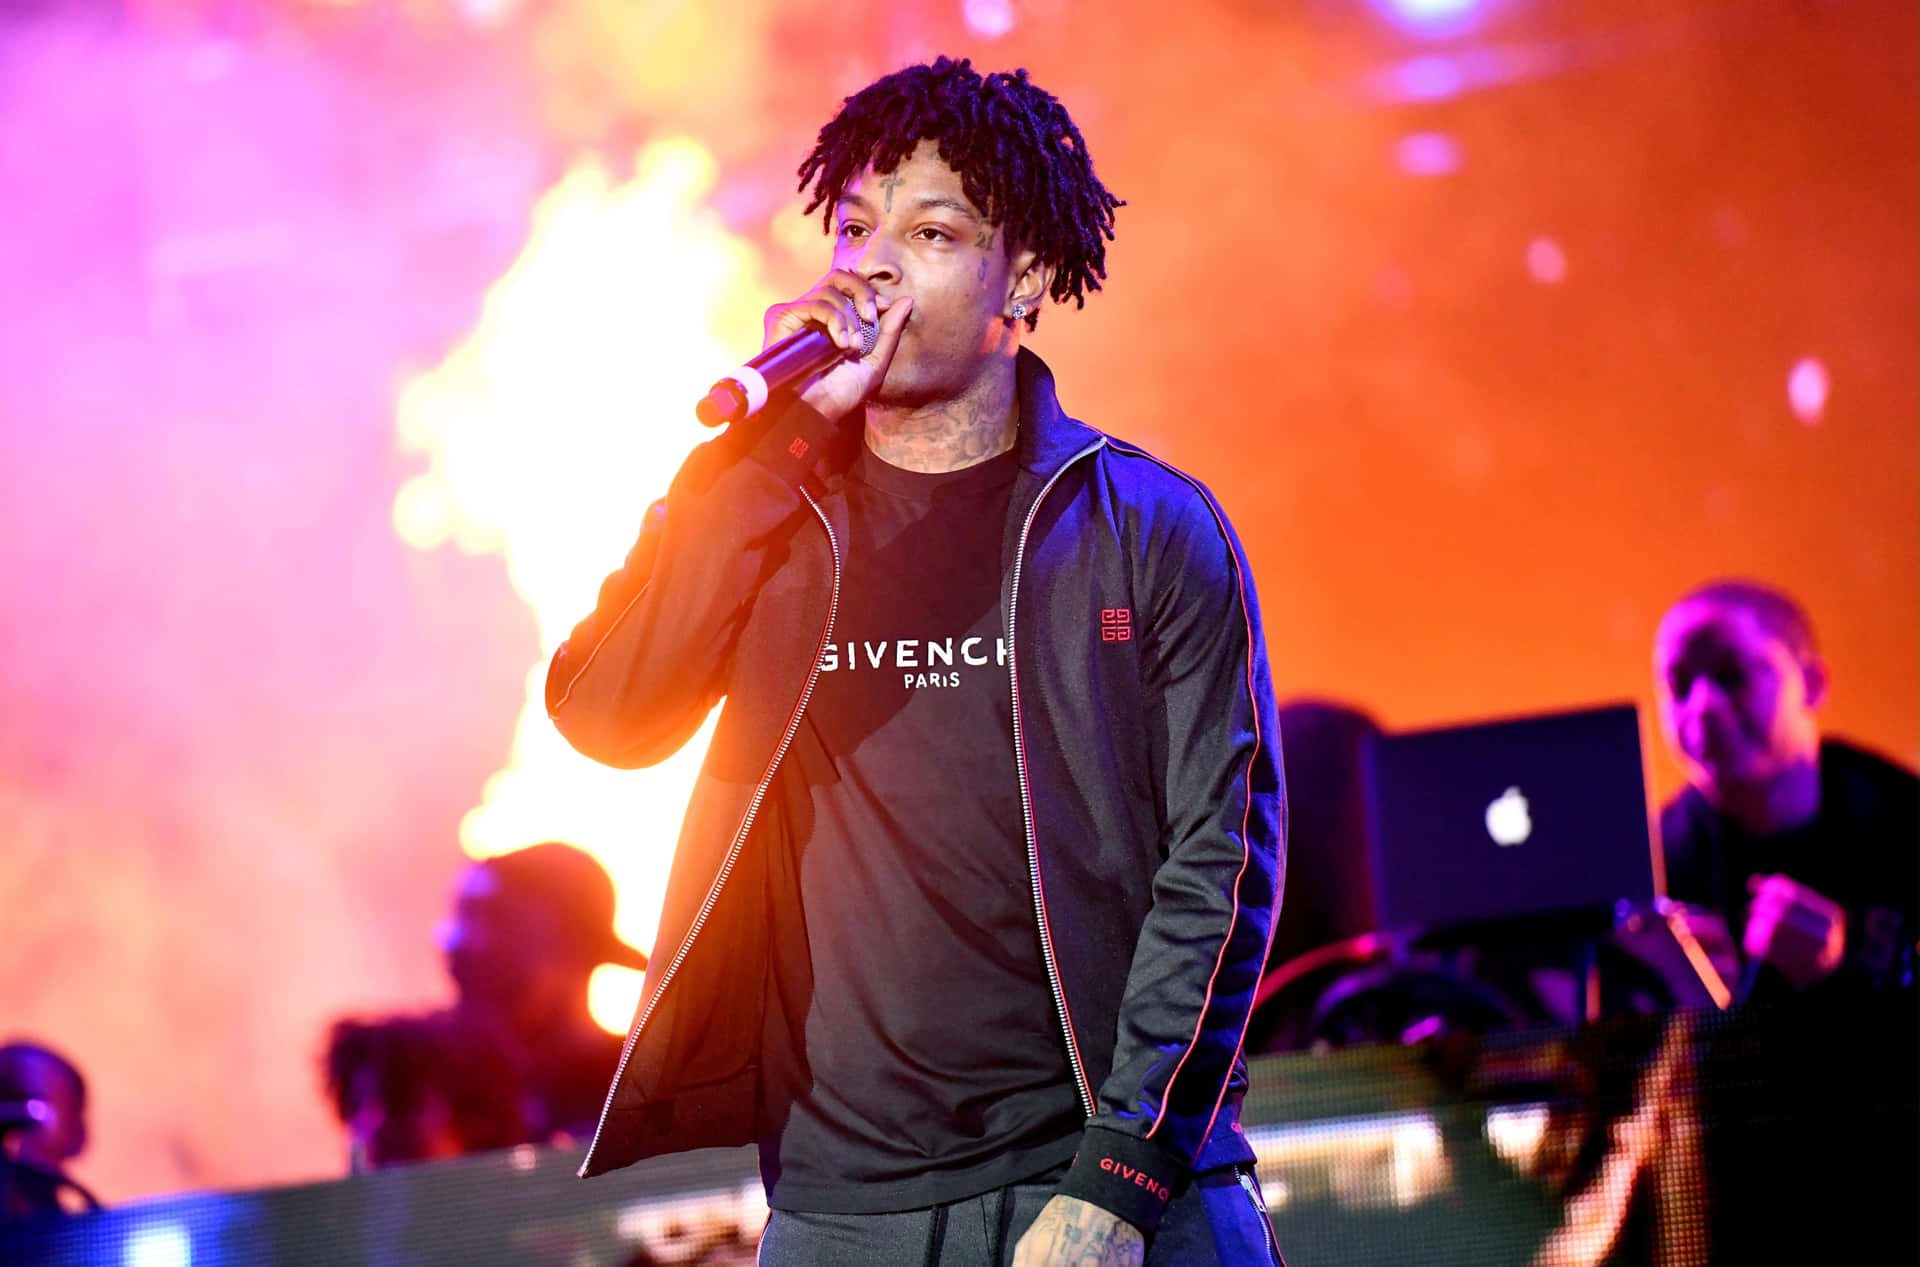 21savage Is A British Rapper And Songwriter. He Gained Popularity In 2015 With His Mixtapes And Later Achieved Mainstream Success With His Debut Studio Album 